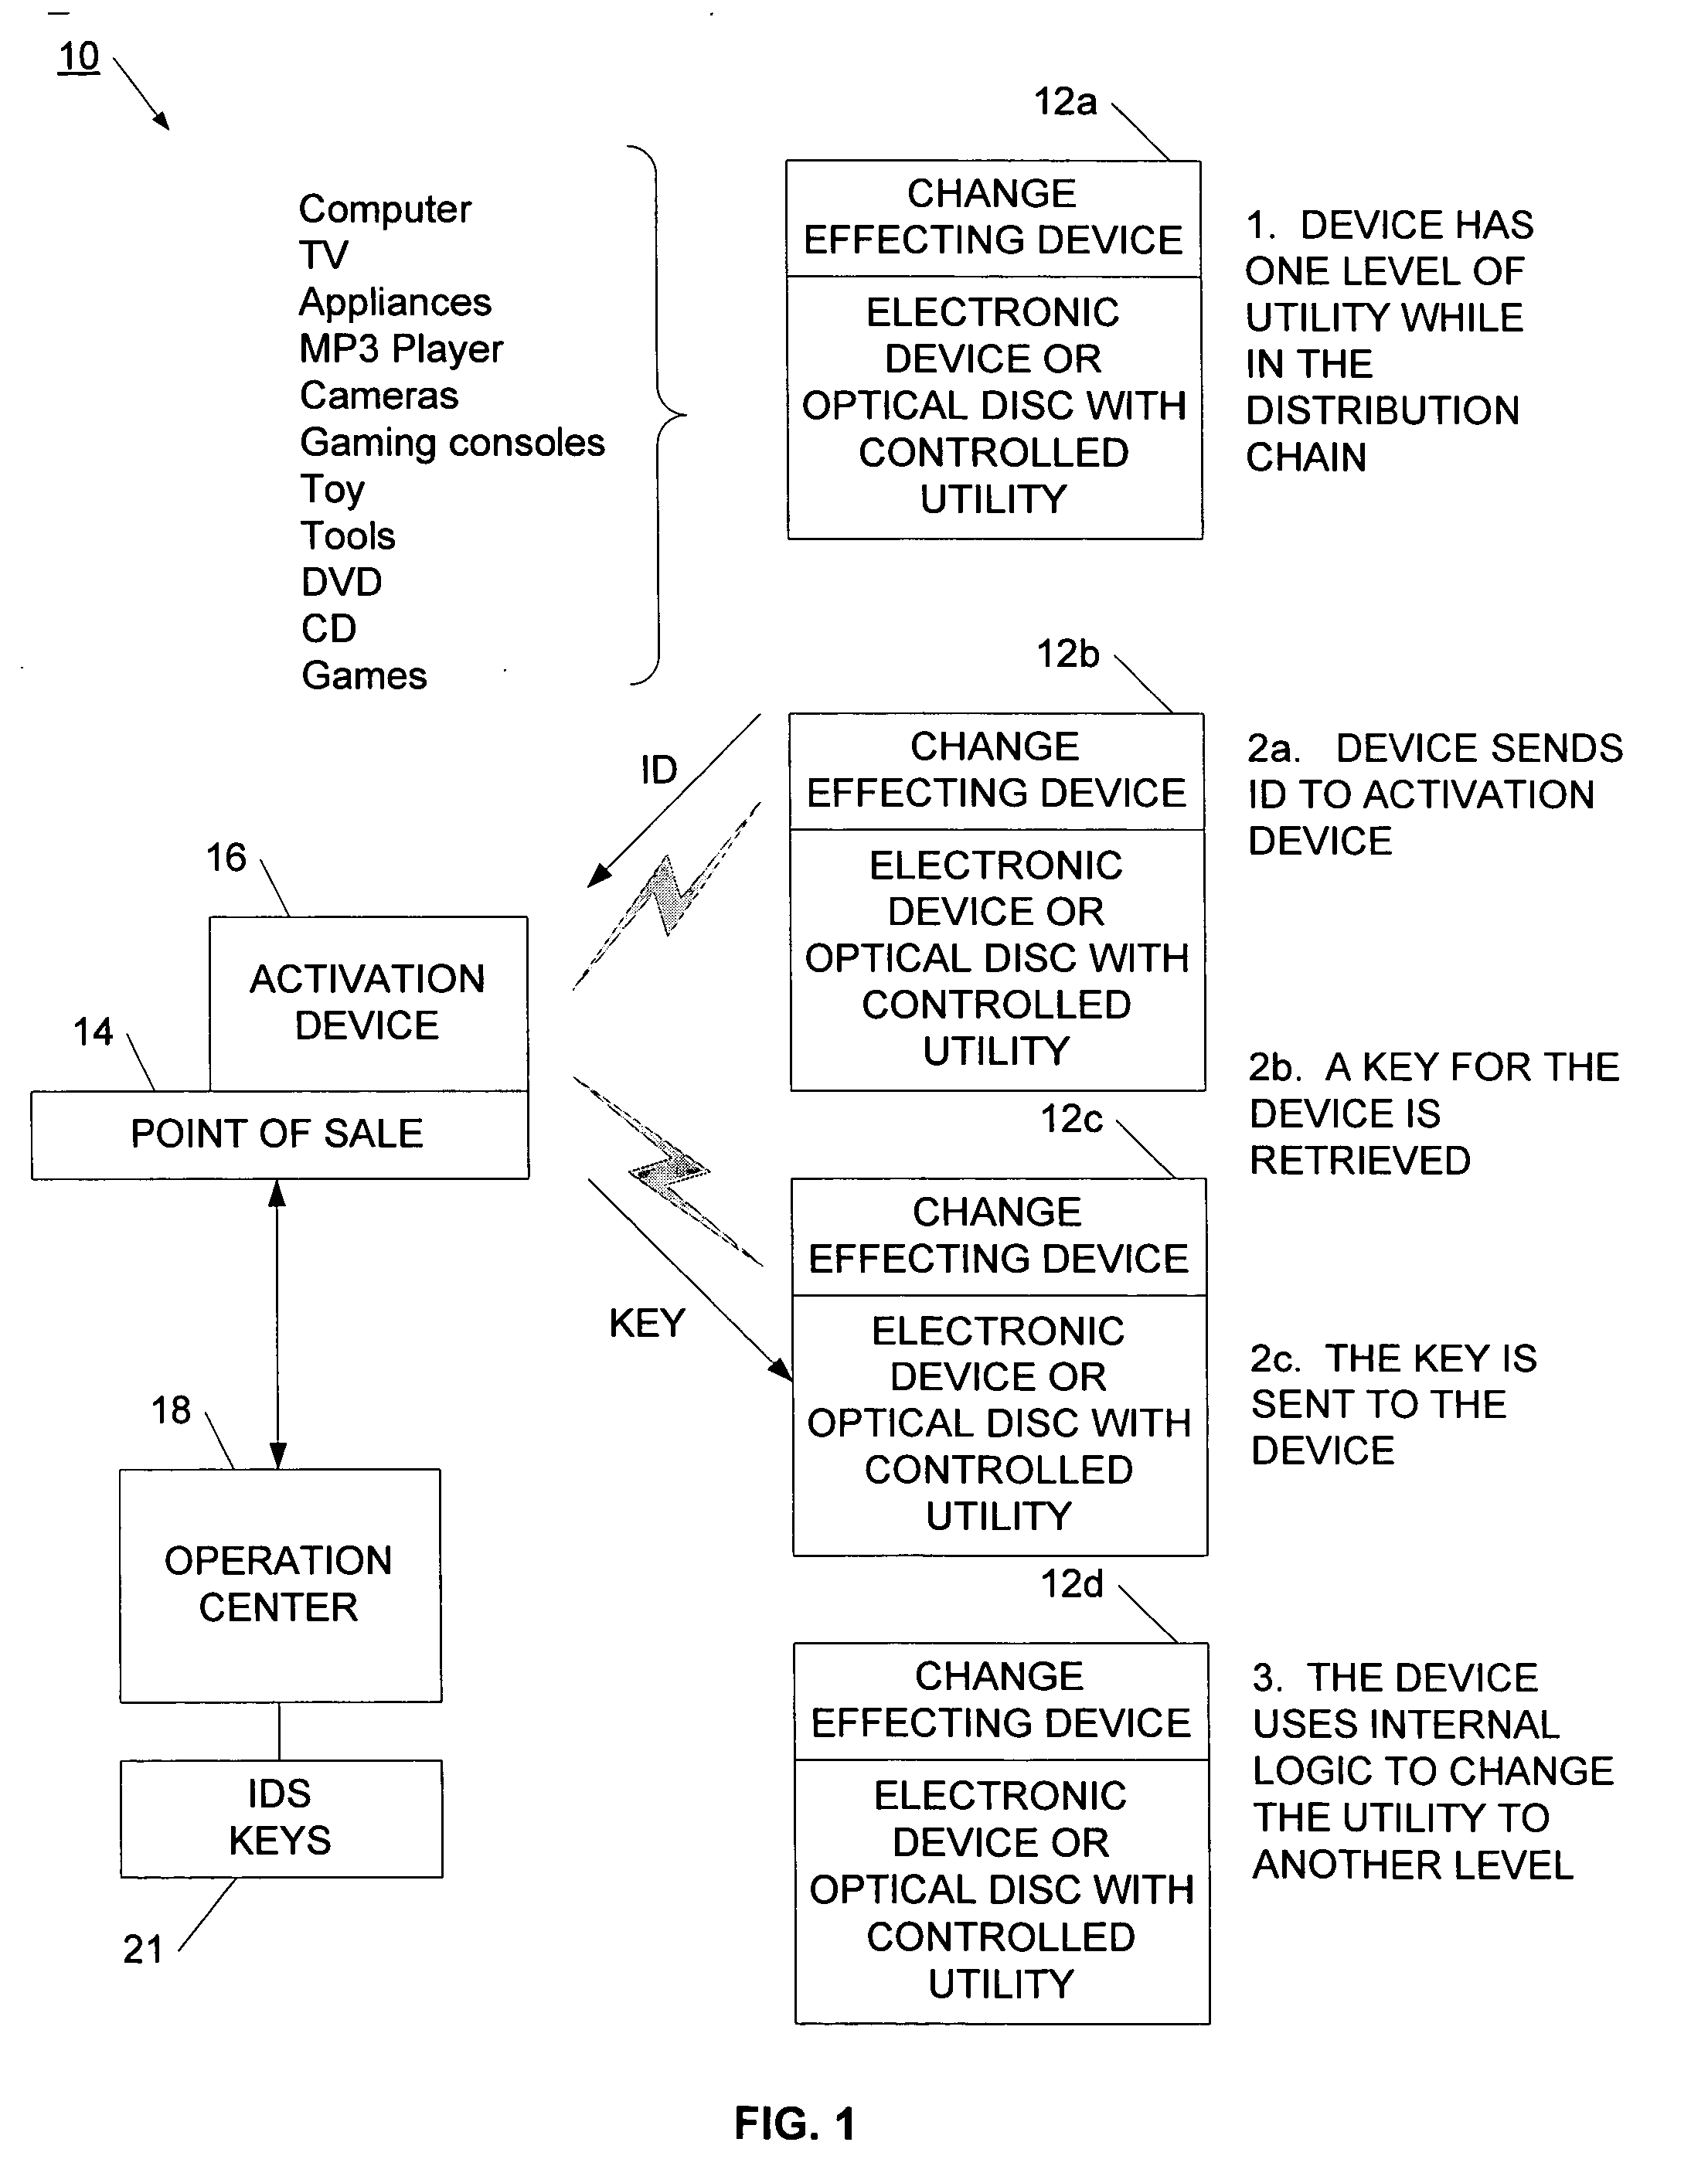 Method and network for selectively controlling the utility a target